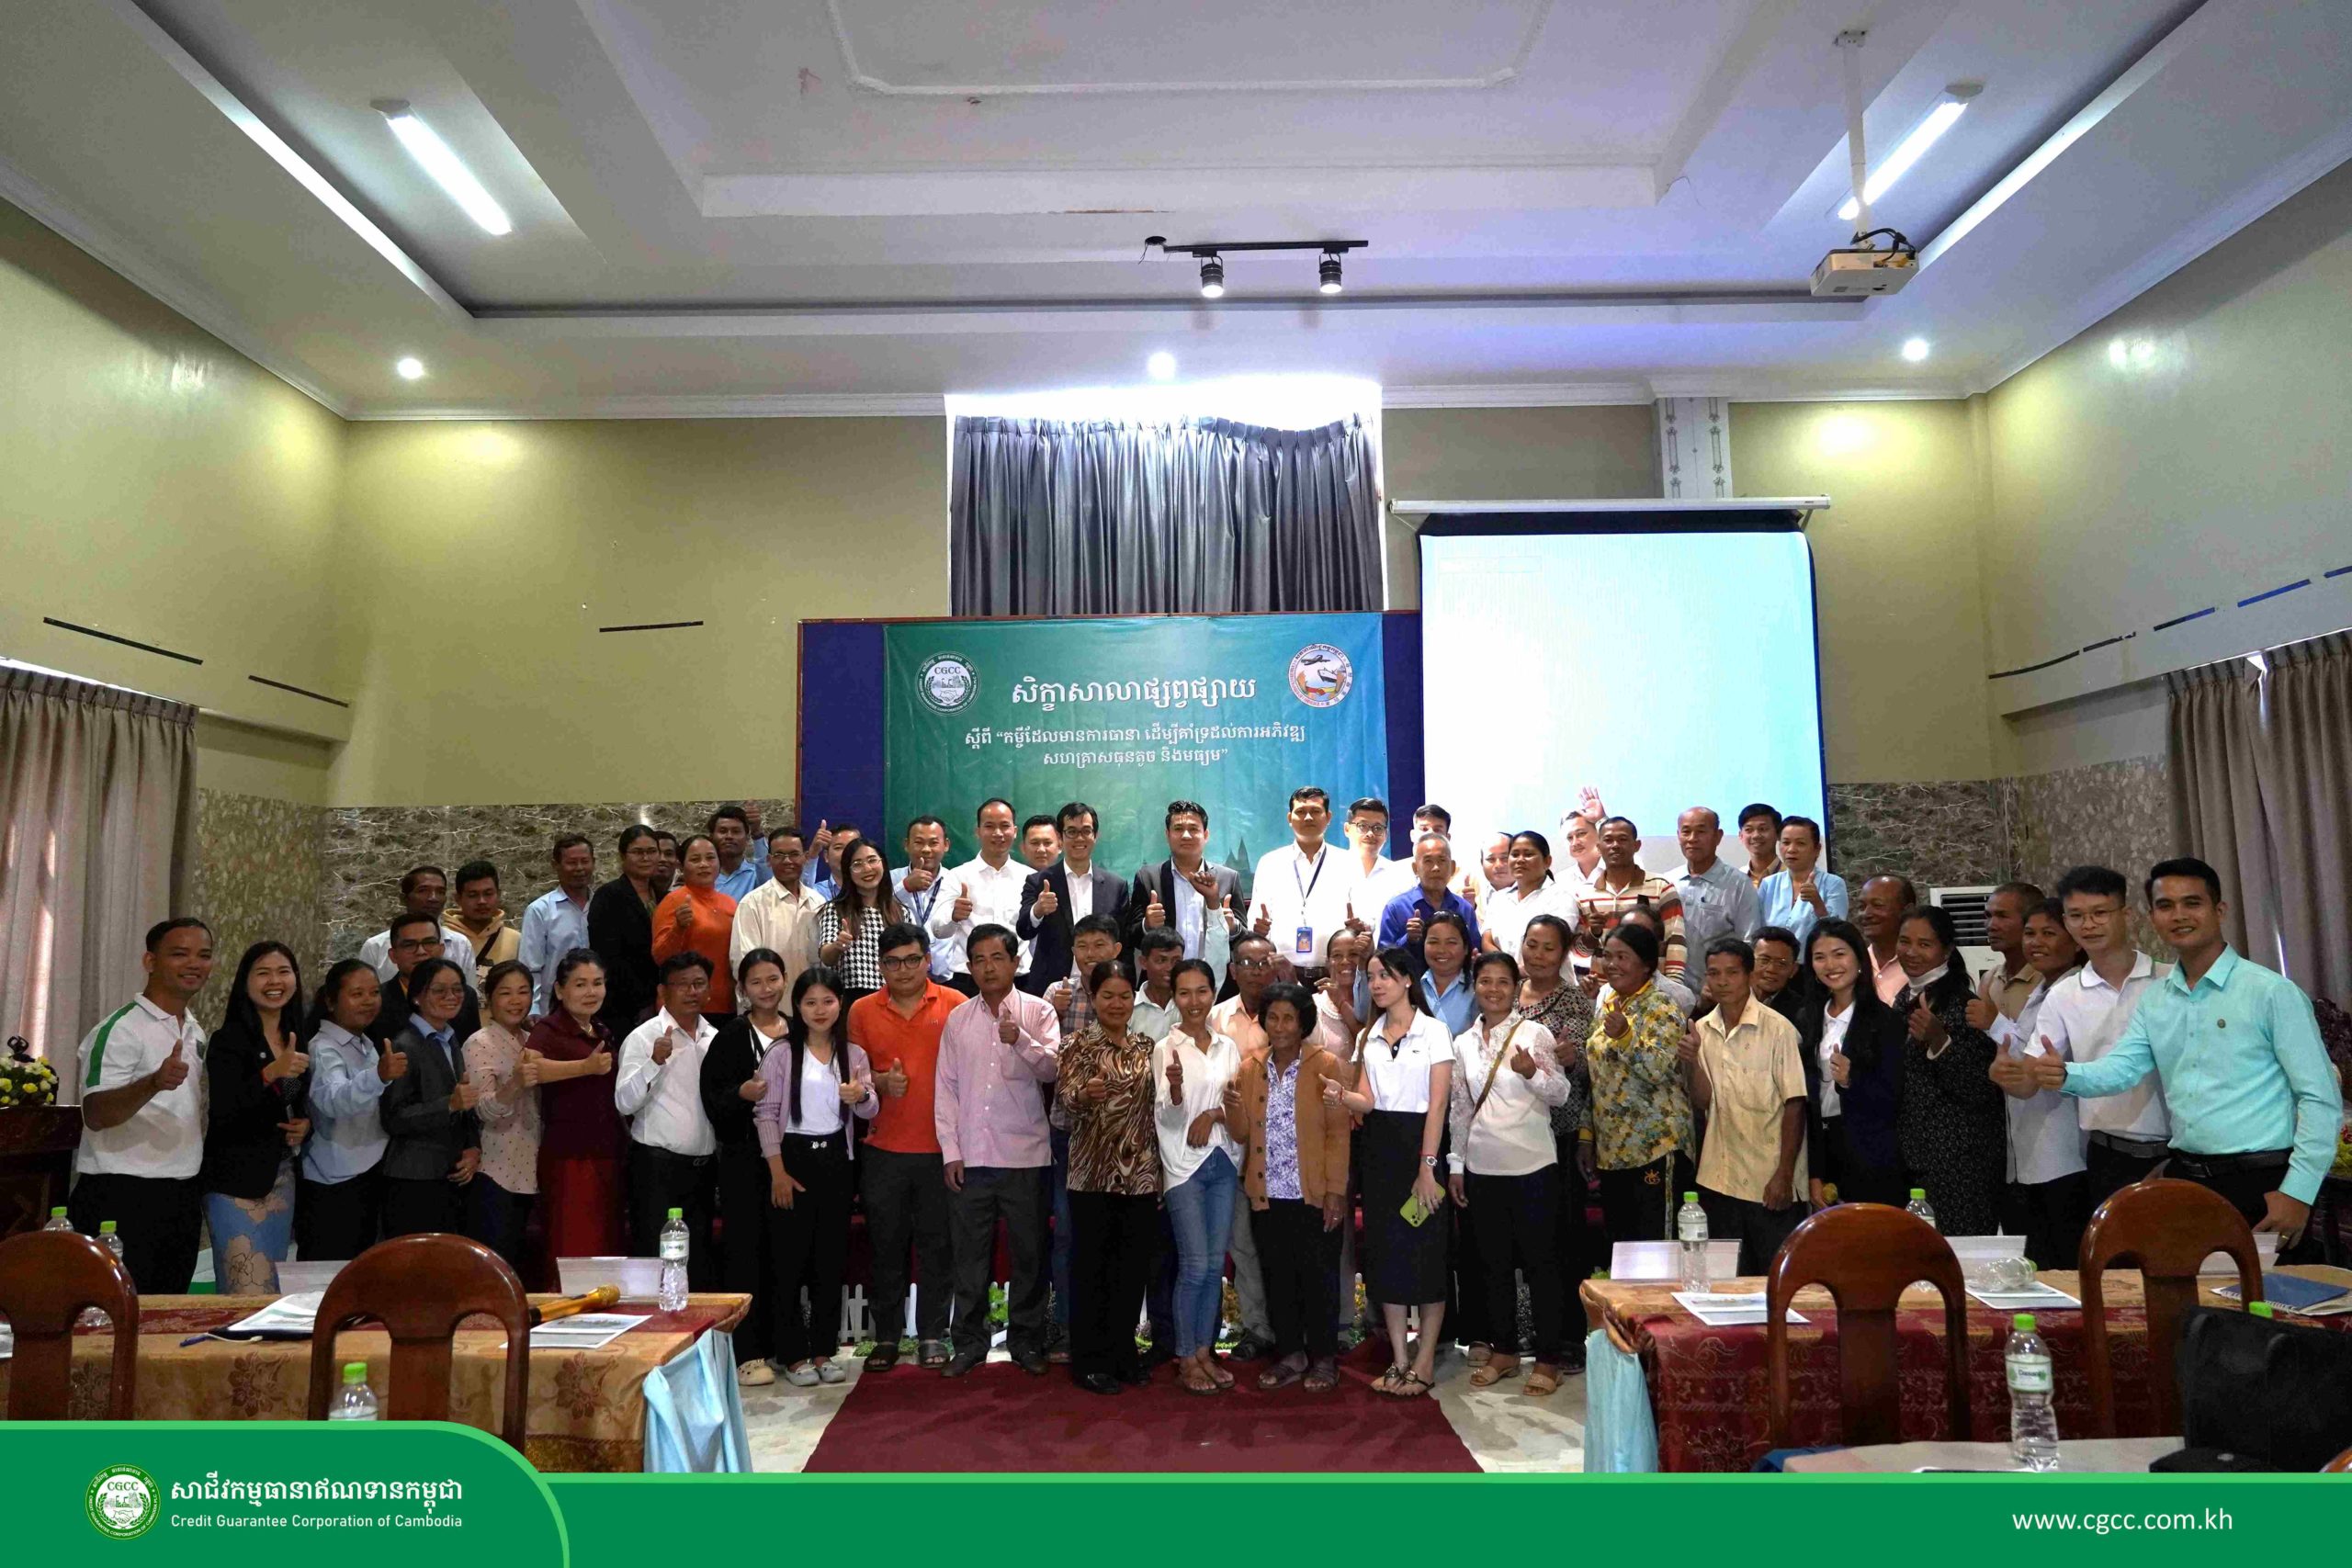 Dissemination Seminar on “Guaranteed Loans to Support the Development of Small and Medium Enterprises” in Kratie Province